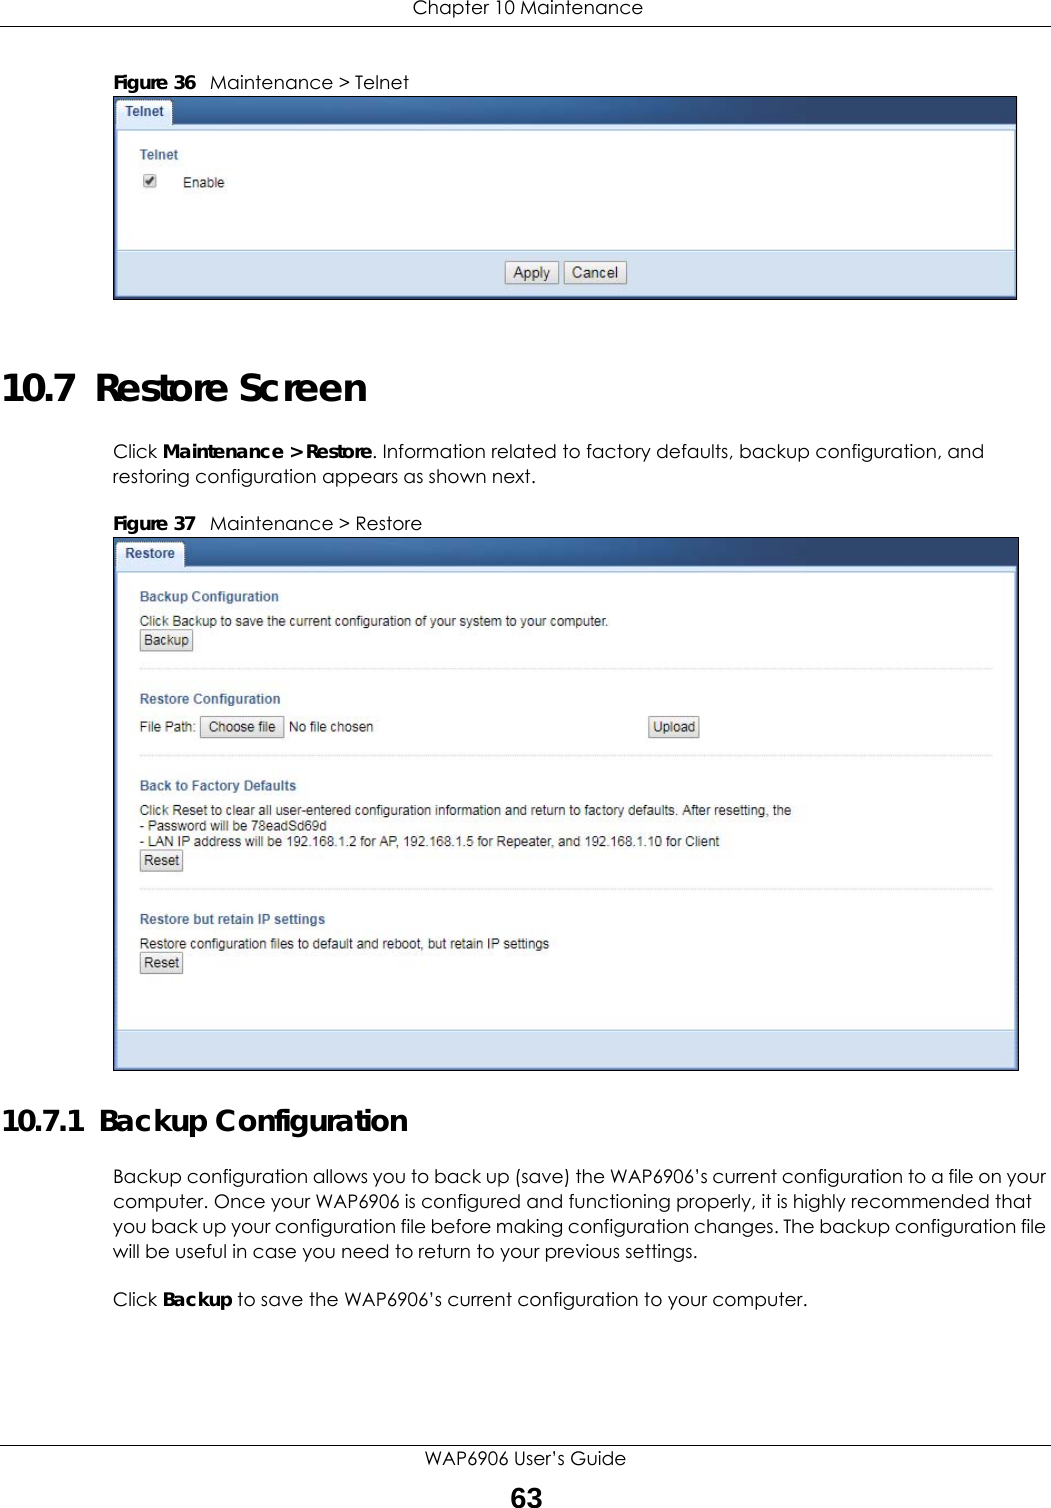  Chapter 10 MaintenanceWAP6906 User’s Guide63Figure 36   Maintenance &gt; Telnet 10.7  Restore ScreenClick Maintenance &gt; Restore. Information related to factory defaults, backup configuration, and restoring configuration appears as shown next.Figure 37   Maintenance &gt; Restore 10.7.1  Backup ConfigurationBackup configuration allows you to back up (save) the WAP6906’s current configuration to a file on your computer. Once your WAP6906 is configured and functioning properly, it is highly recommended that you back up your configuration file before making configuration changes. The backup configuration file will be useful in case you need to return to your previous settings.Click Backup to save the WAP6906’s current configuration to your computer.